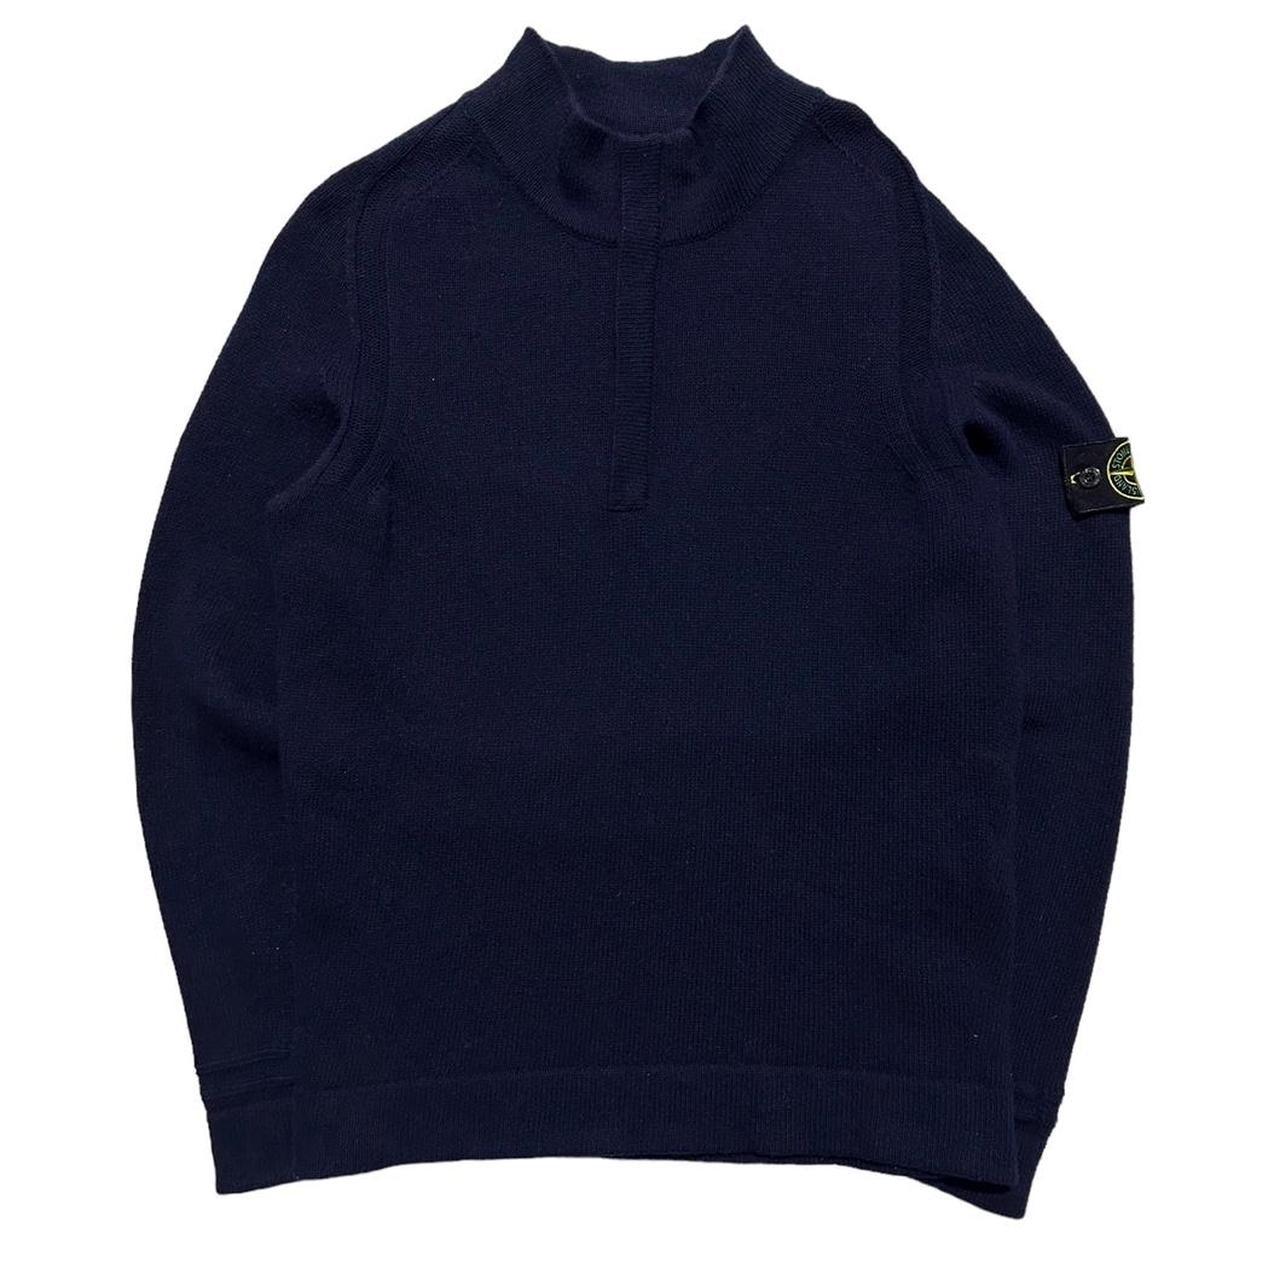 Stone Island Navy Quarter Zip Pullover - Known Source